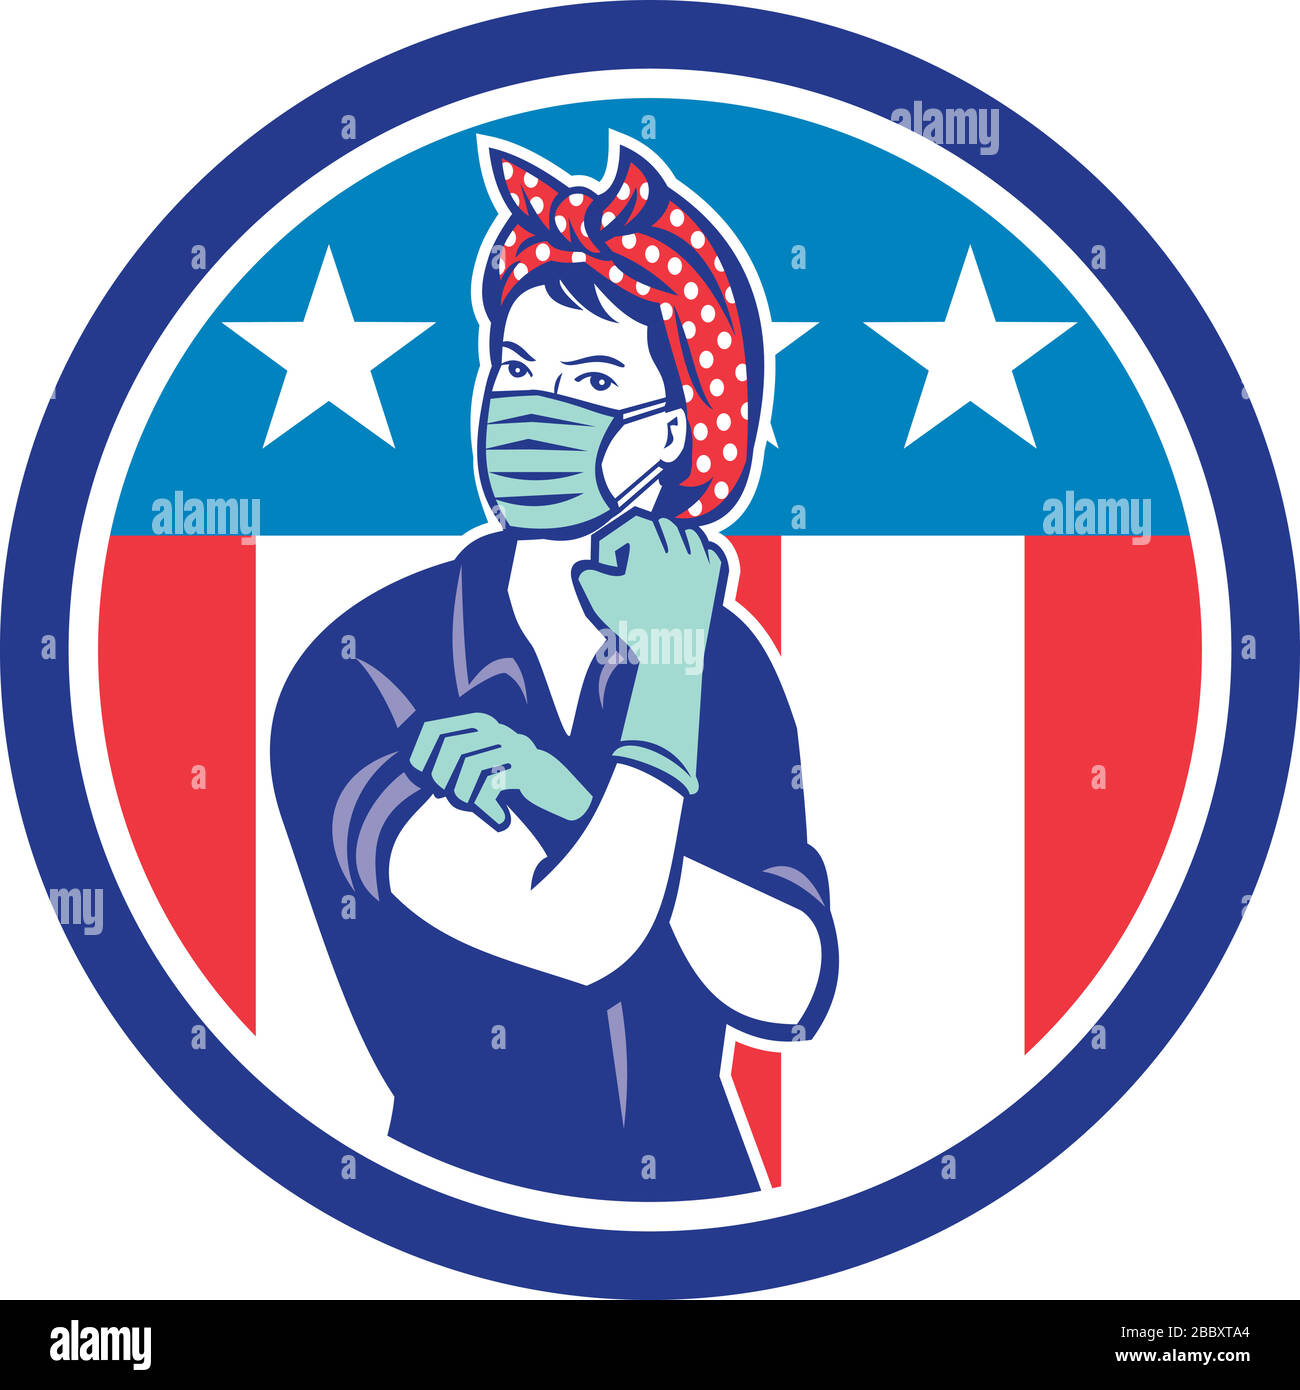 Mascot illustration of Rosie, the riveter, as medical healthcare essential worker wearing a surgical mask and gloves with USA stars and stripes flag s Stock Vector